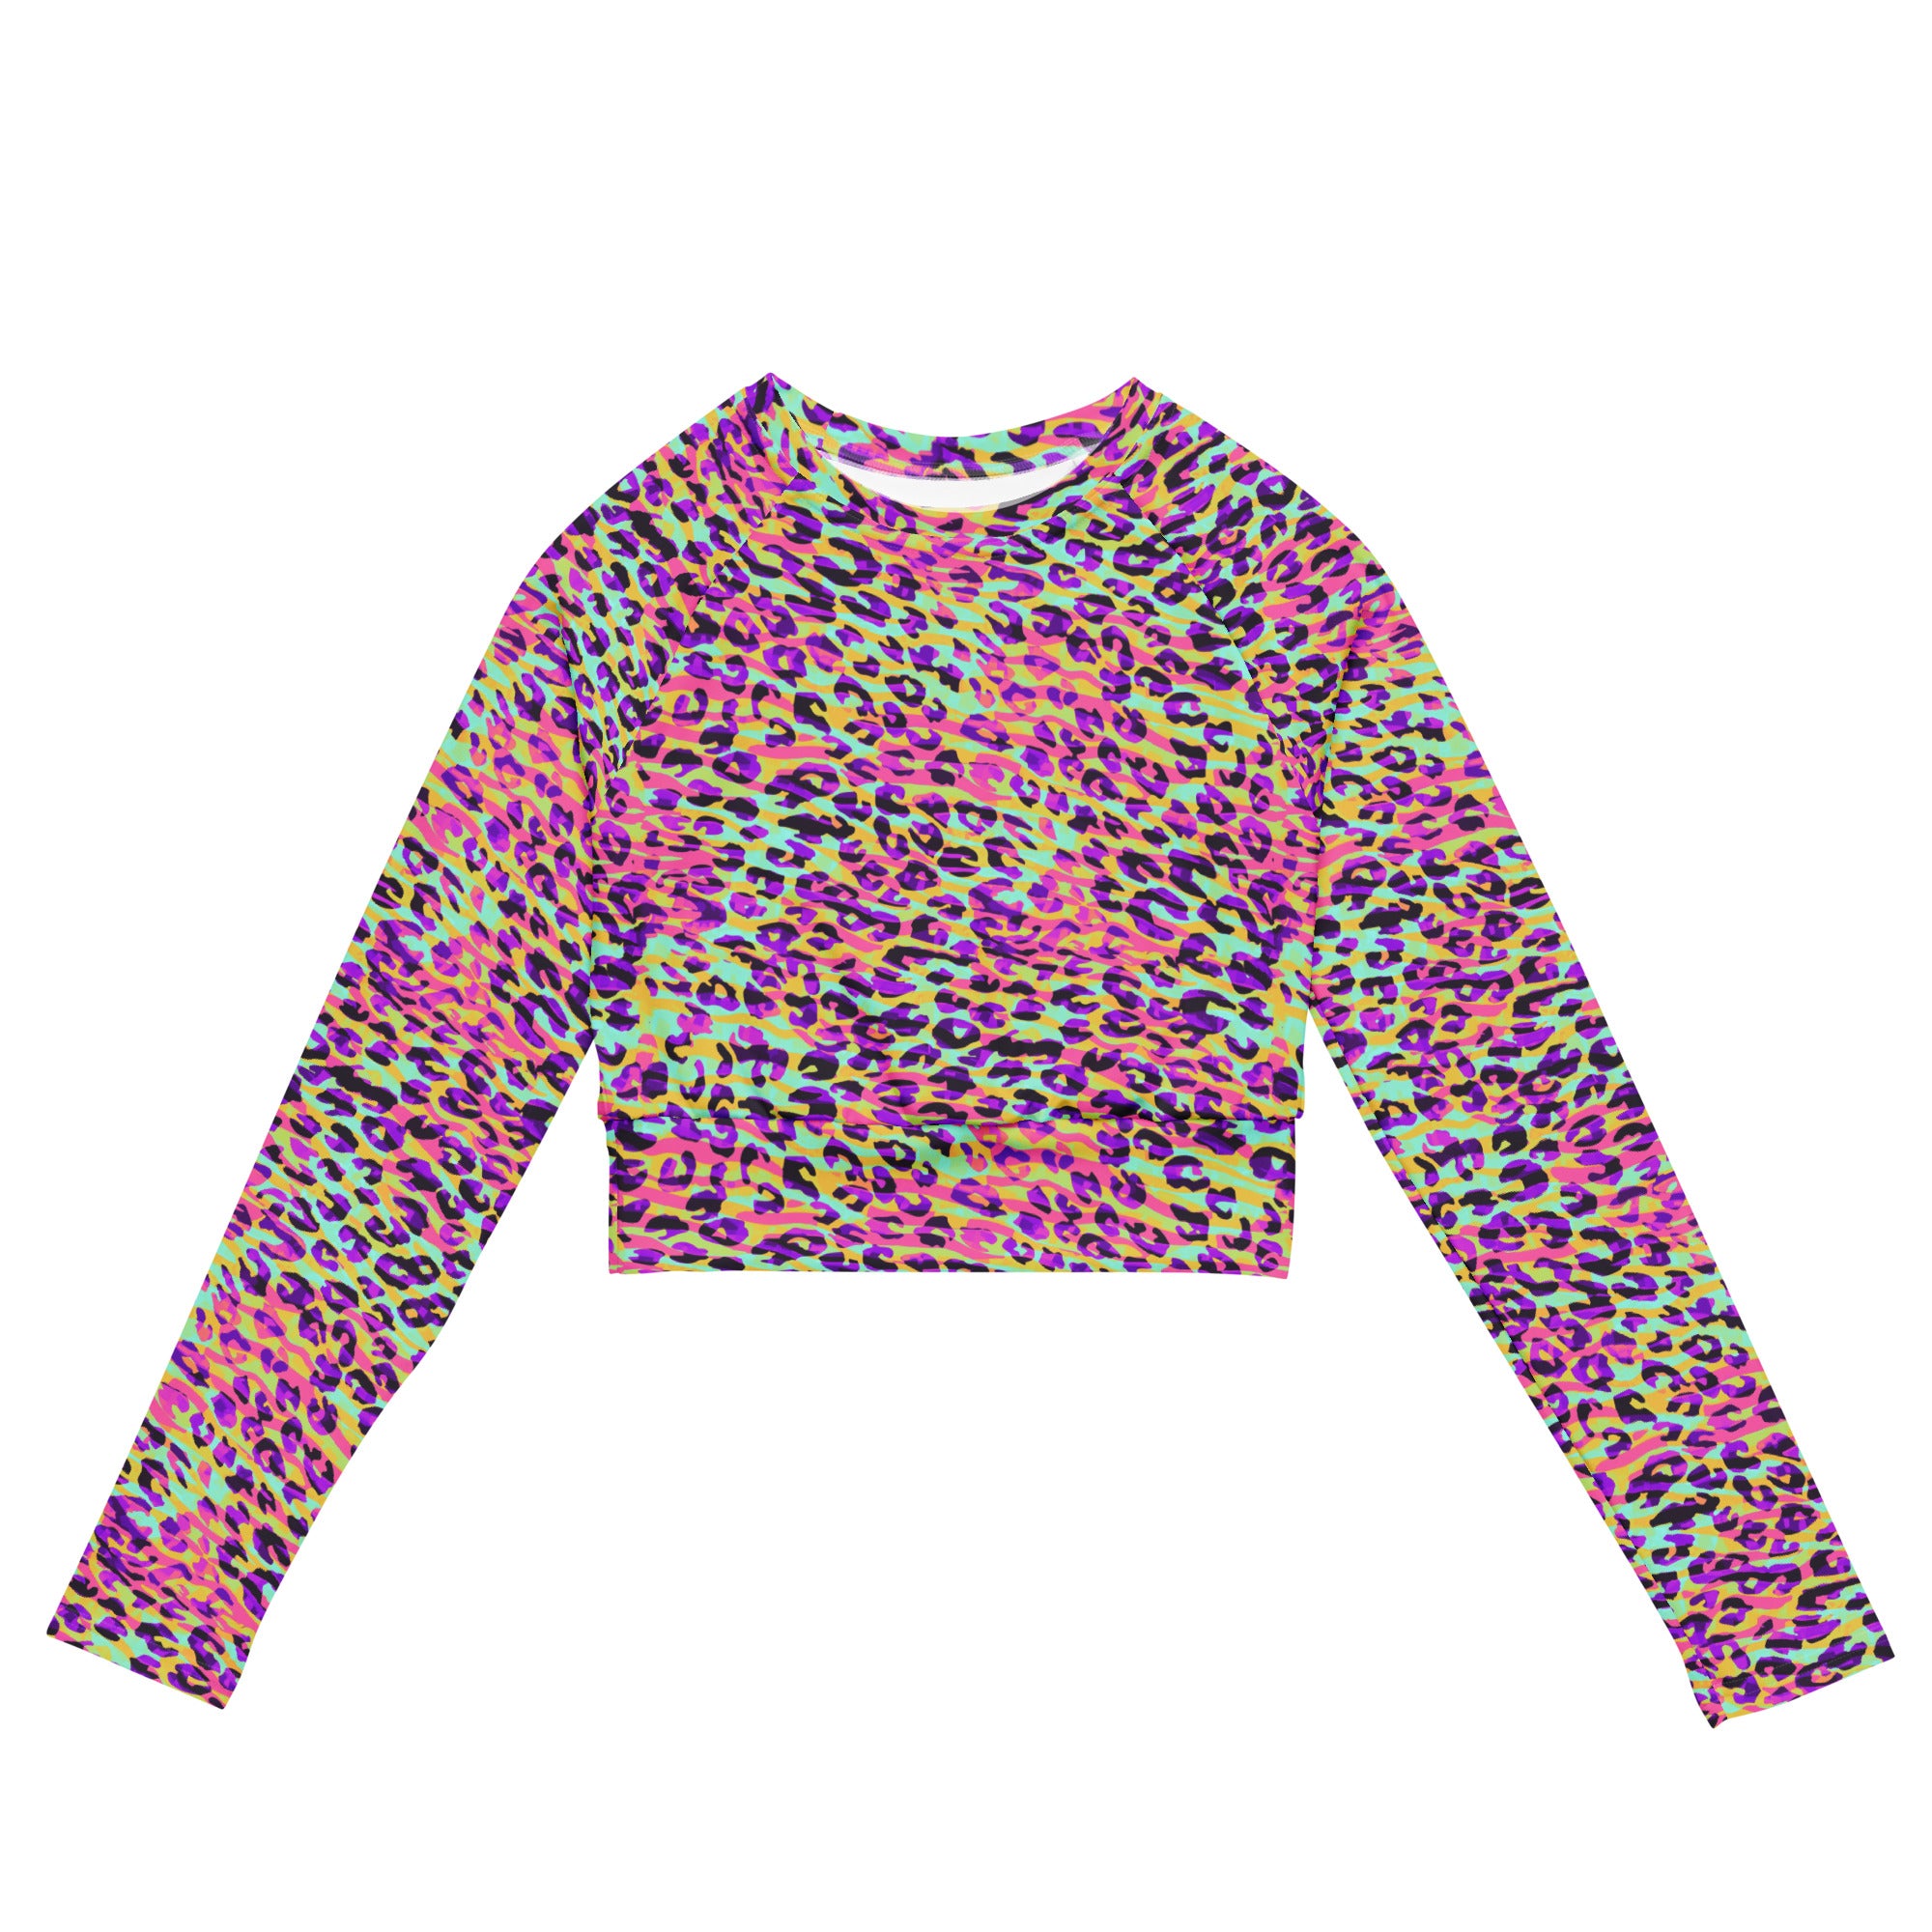 long-sleeve crop top- Zebra and Leopard print Pink with yellow